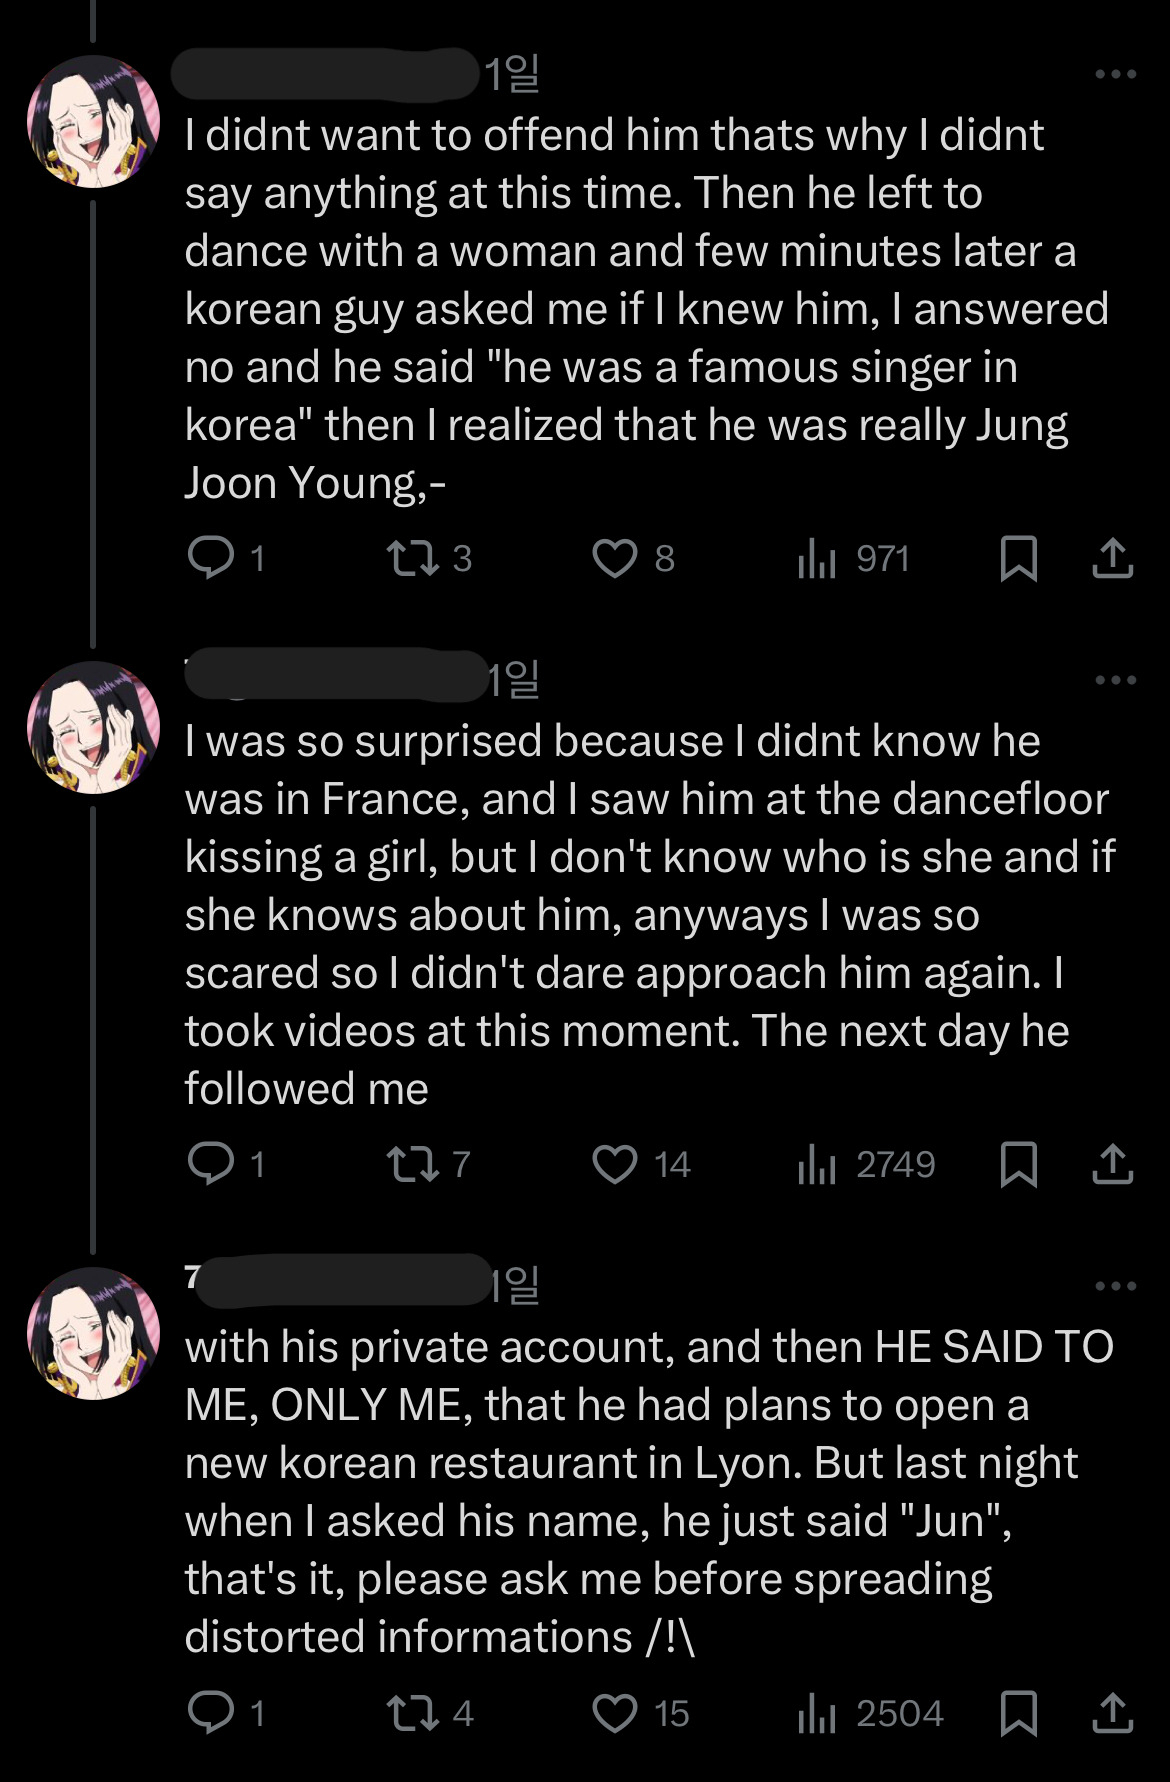 French netizen's X post about her encounter with Jung Joon-young at a nightclub in Lyon, France (French netizen's X account)